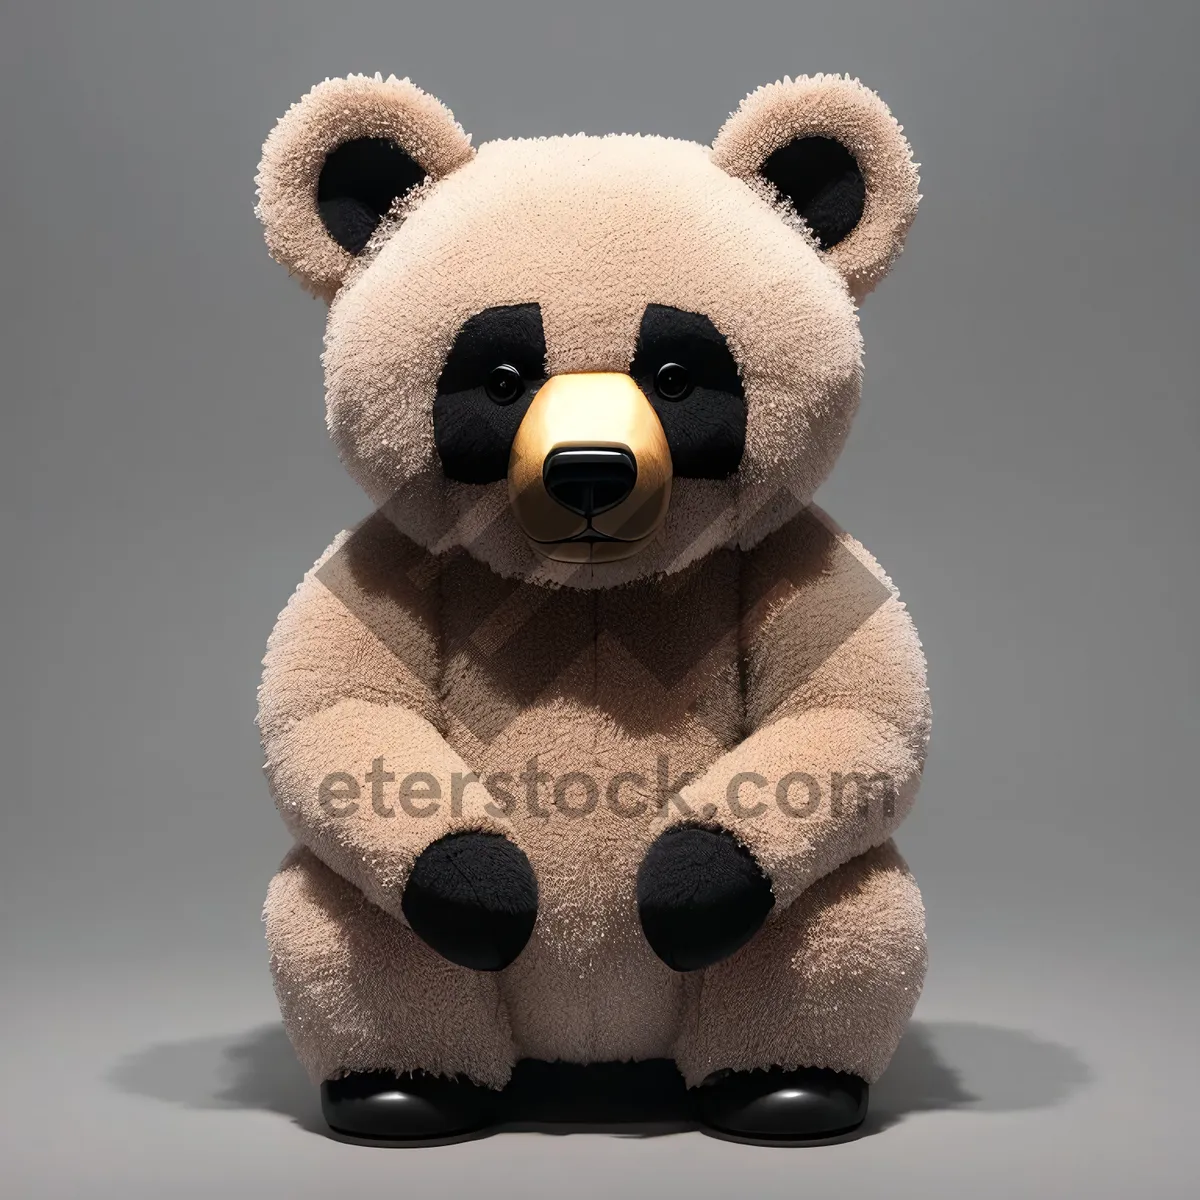 Picture of Cute Teddy Bear Toy - Perfect Valentine's Day Gift